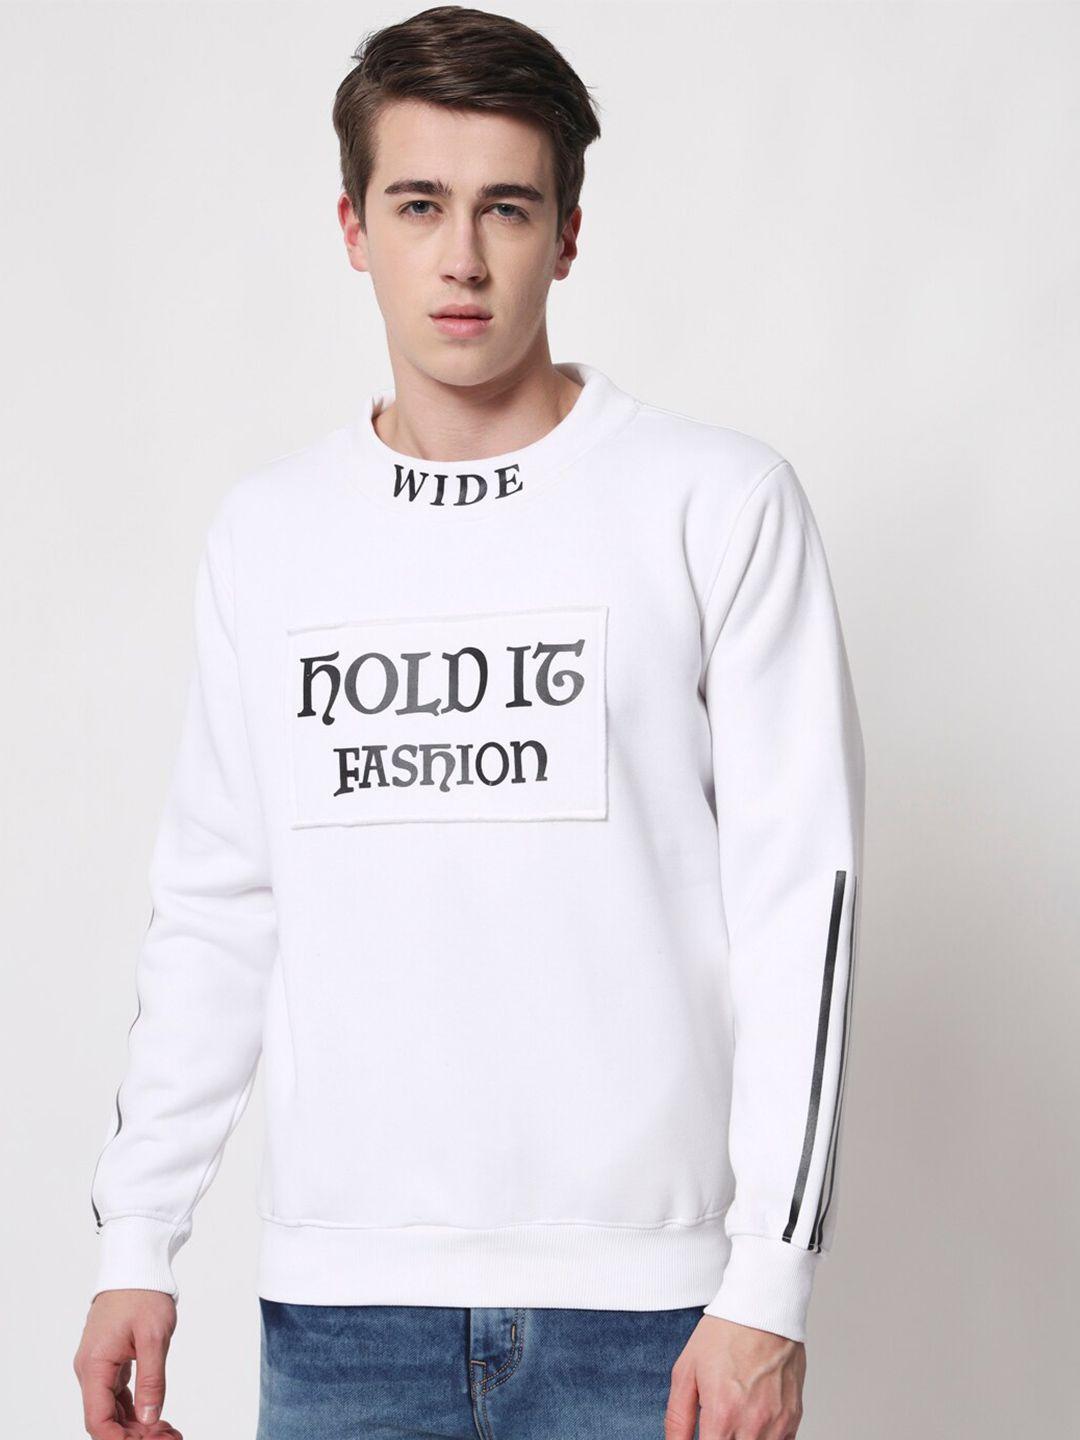 holdit men typography printed knitted pullover sweatshirt